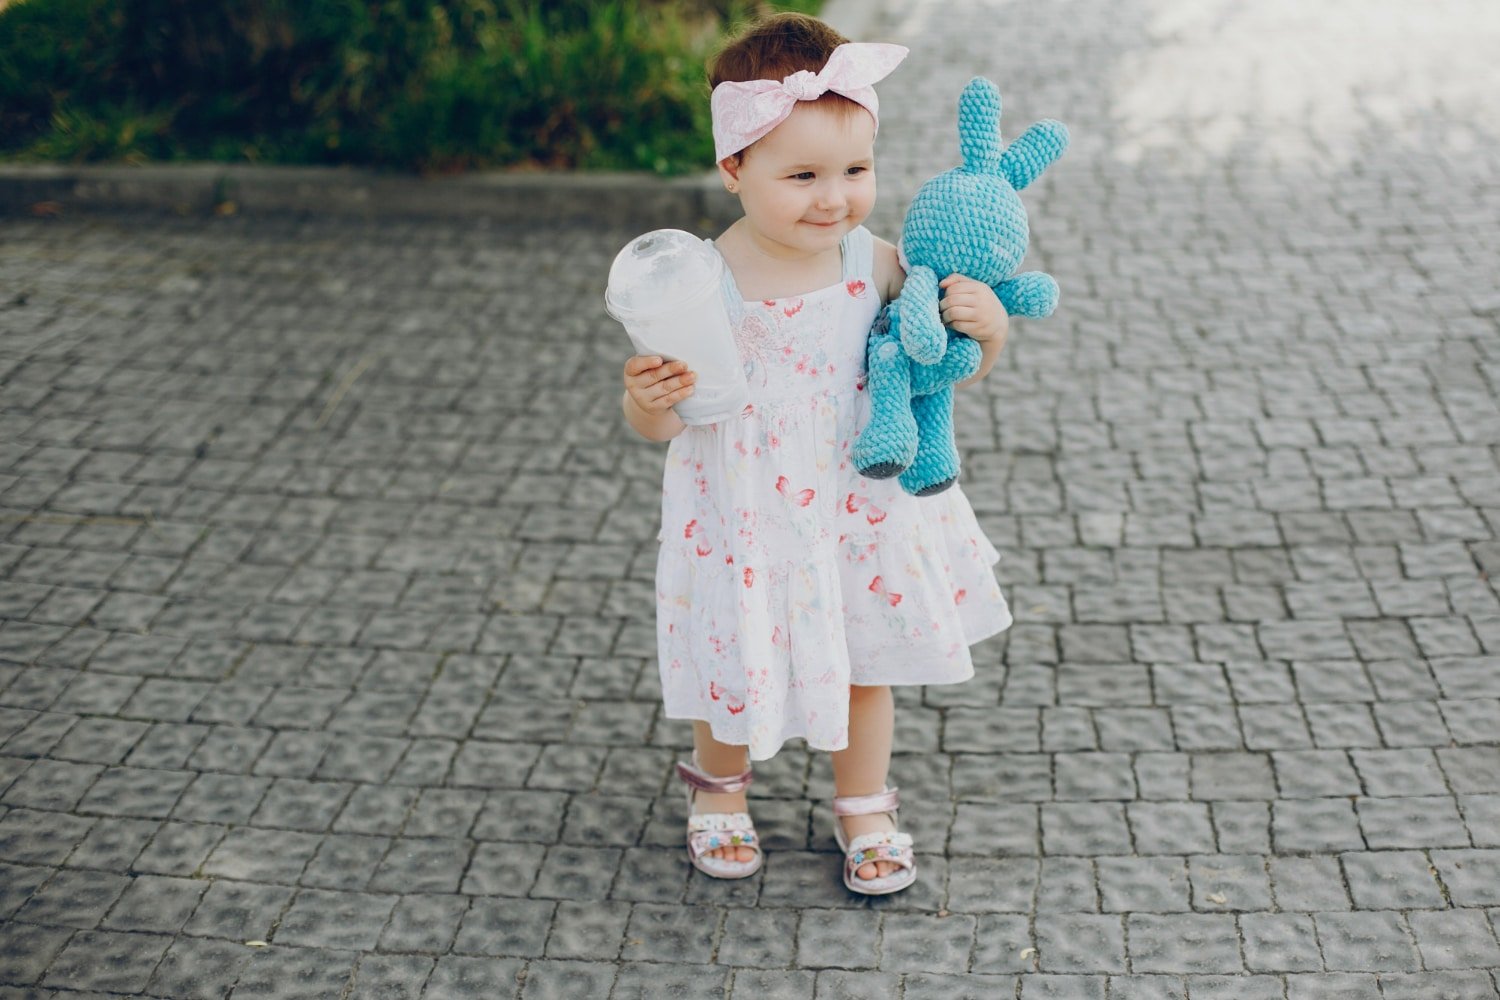 You are currently viewing Dress Your Little Ones In RuffleButts’s Cute Children’s Clothing